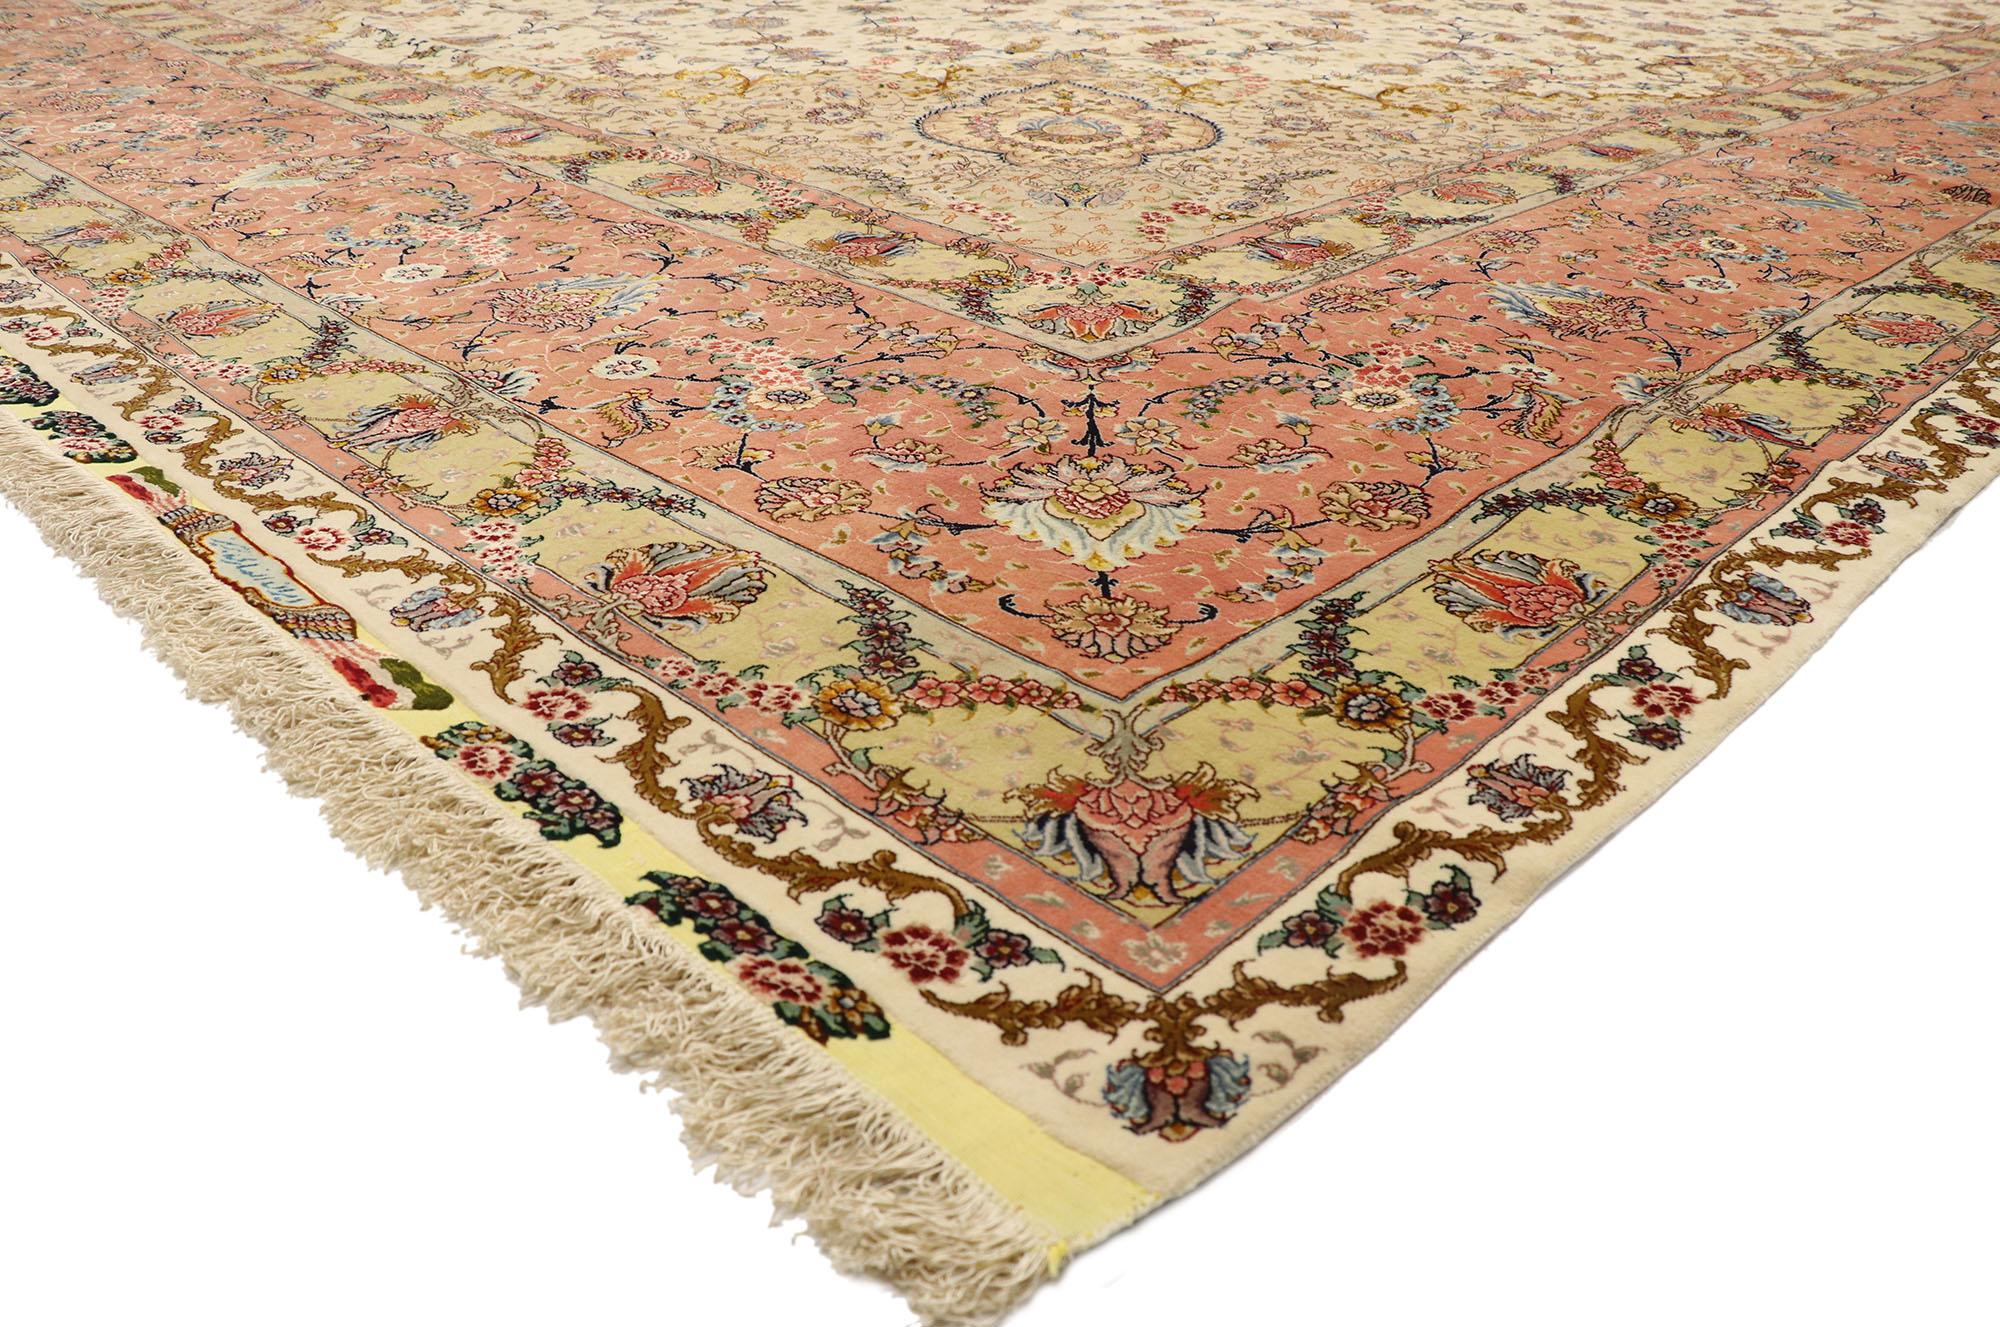 77436 Vintage Persian Tabriz Shirfar Rug with Romantic French Provincial Rococo Style 16'11 x 26'09. Fashioned by the adept touch of Shir Far, a celebrated master weaver originating from Tabriz, Iran, this vintage Persian Tabriz rug epitomizes the